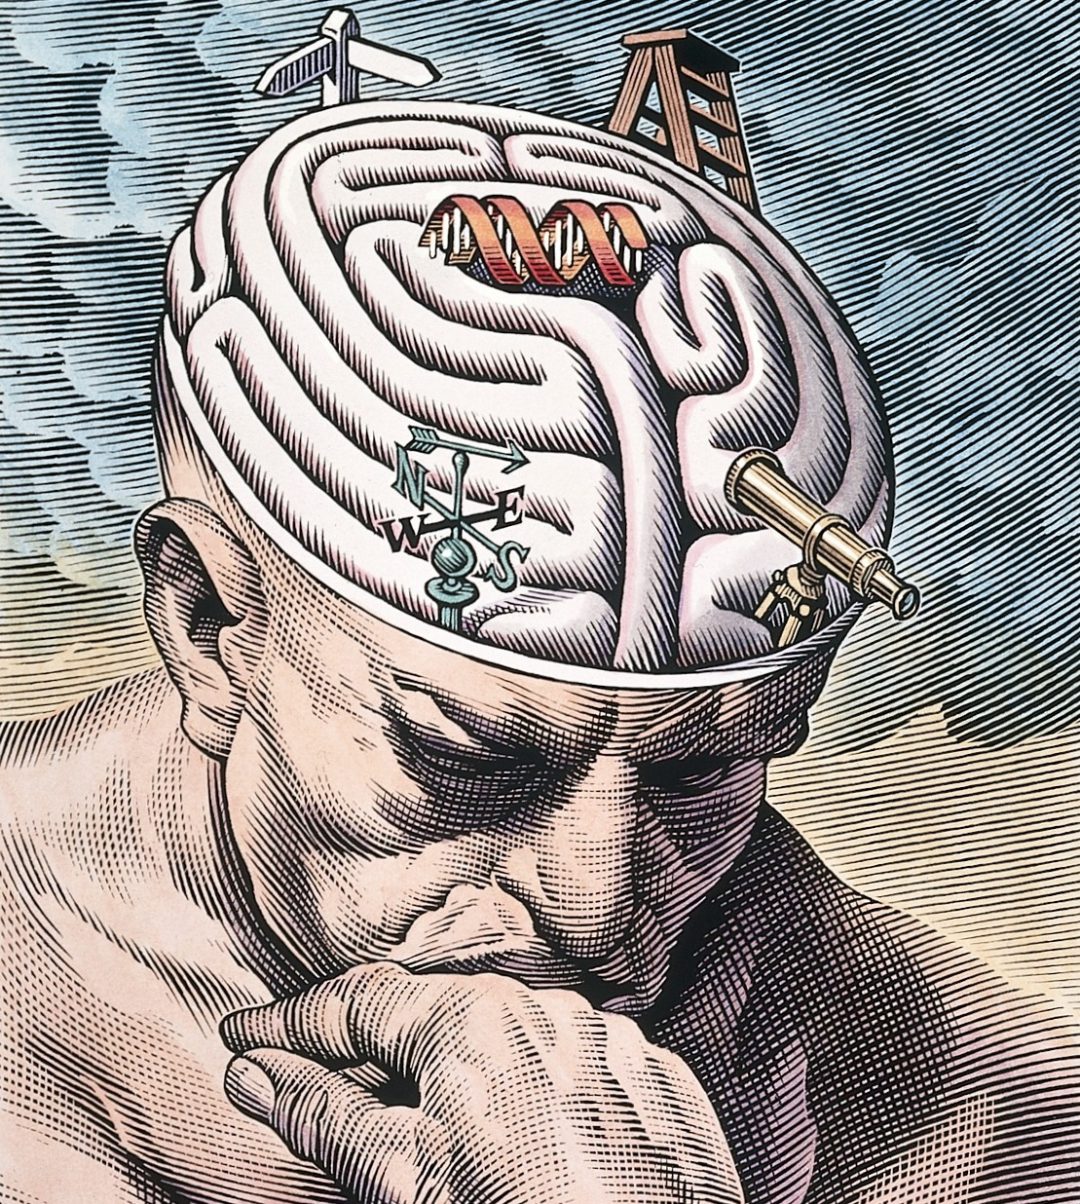 The_gyri_of_the_thinkers_brain_as_a_maze_of_choices_in_biom_Wellcome_L0027293-1080x1204.jpg